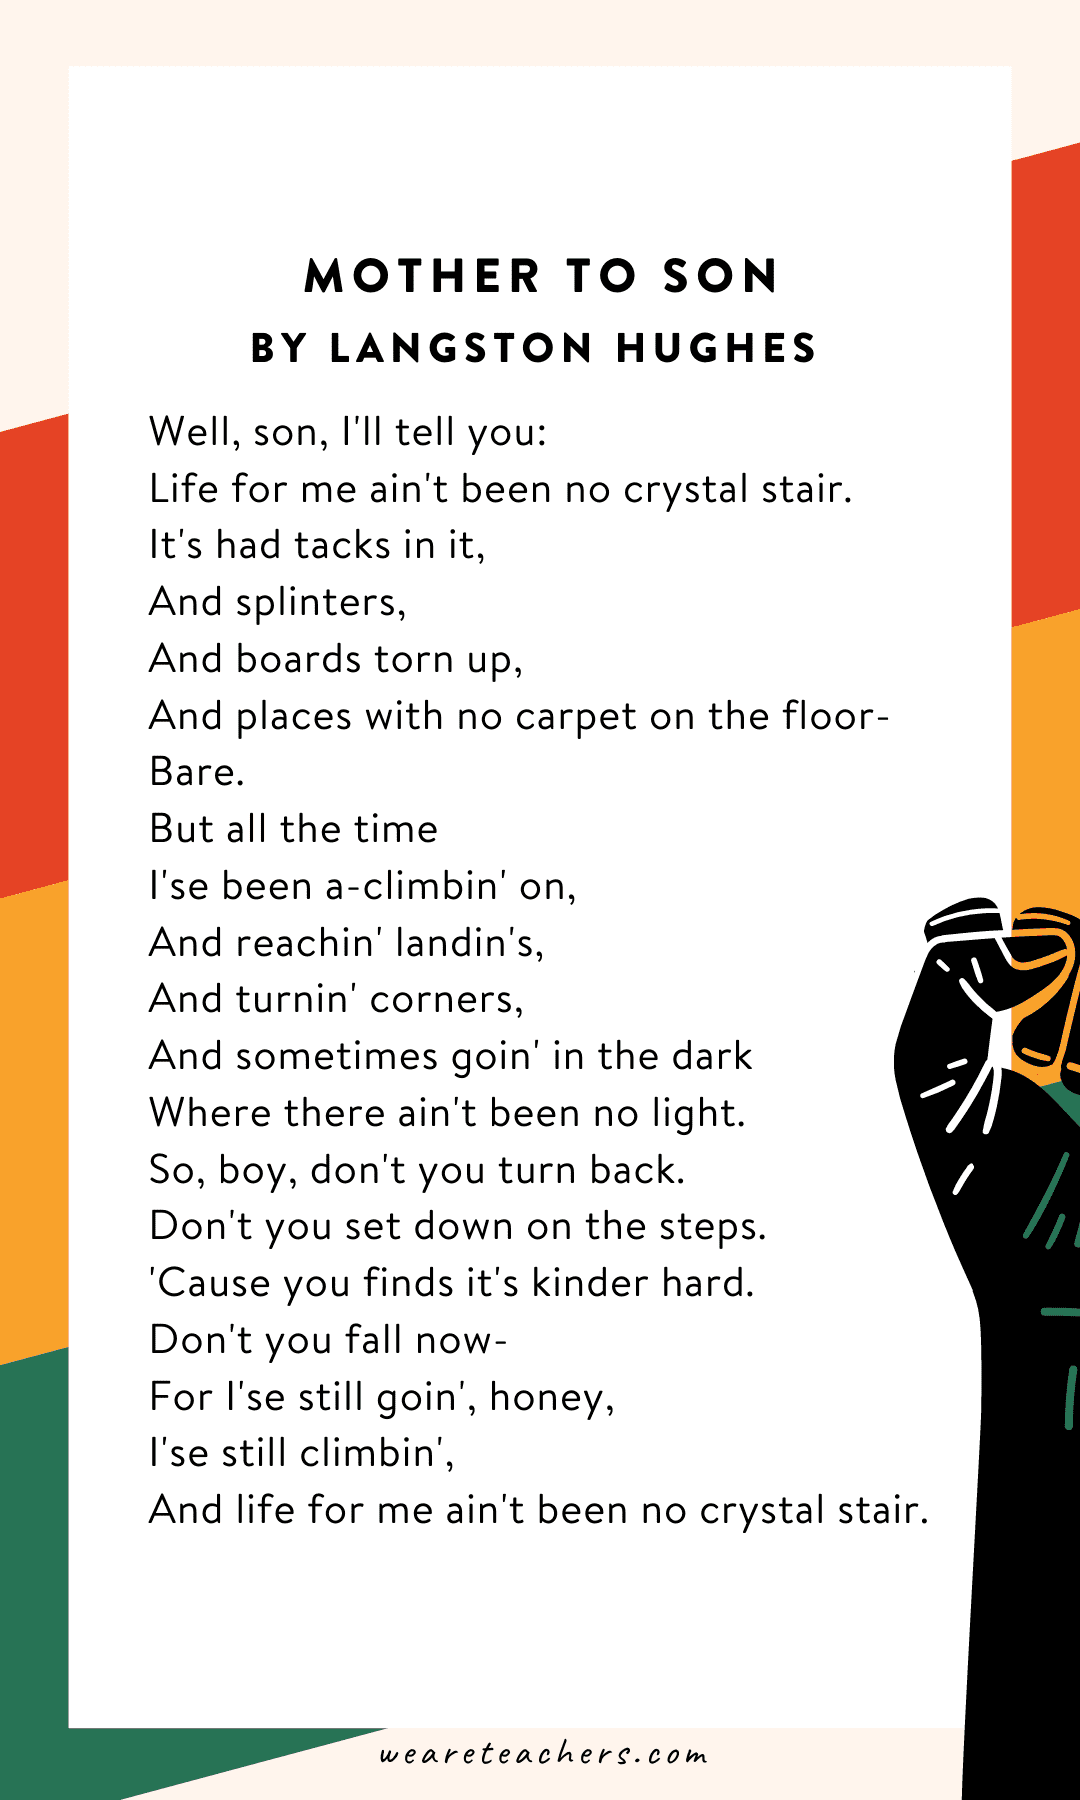 Mother To Son by Langston Hughes “Life for me ain't been no crystal stair.”